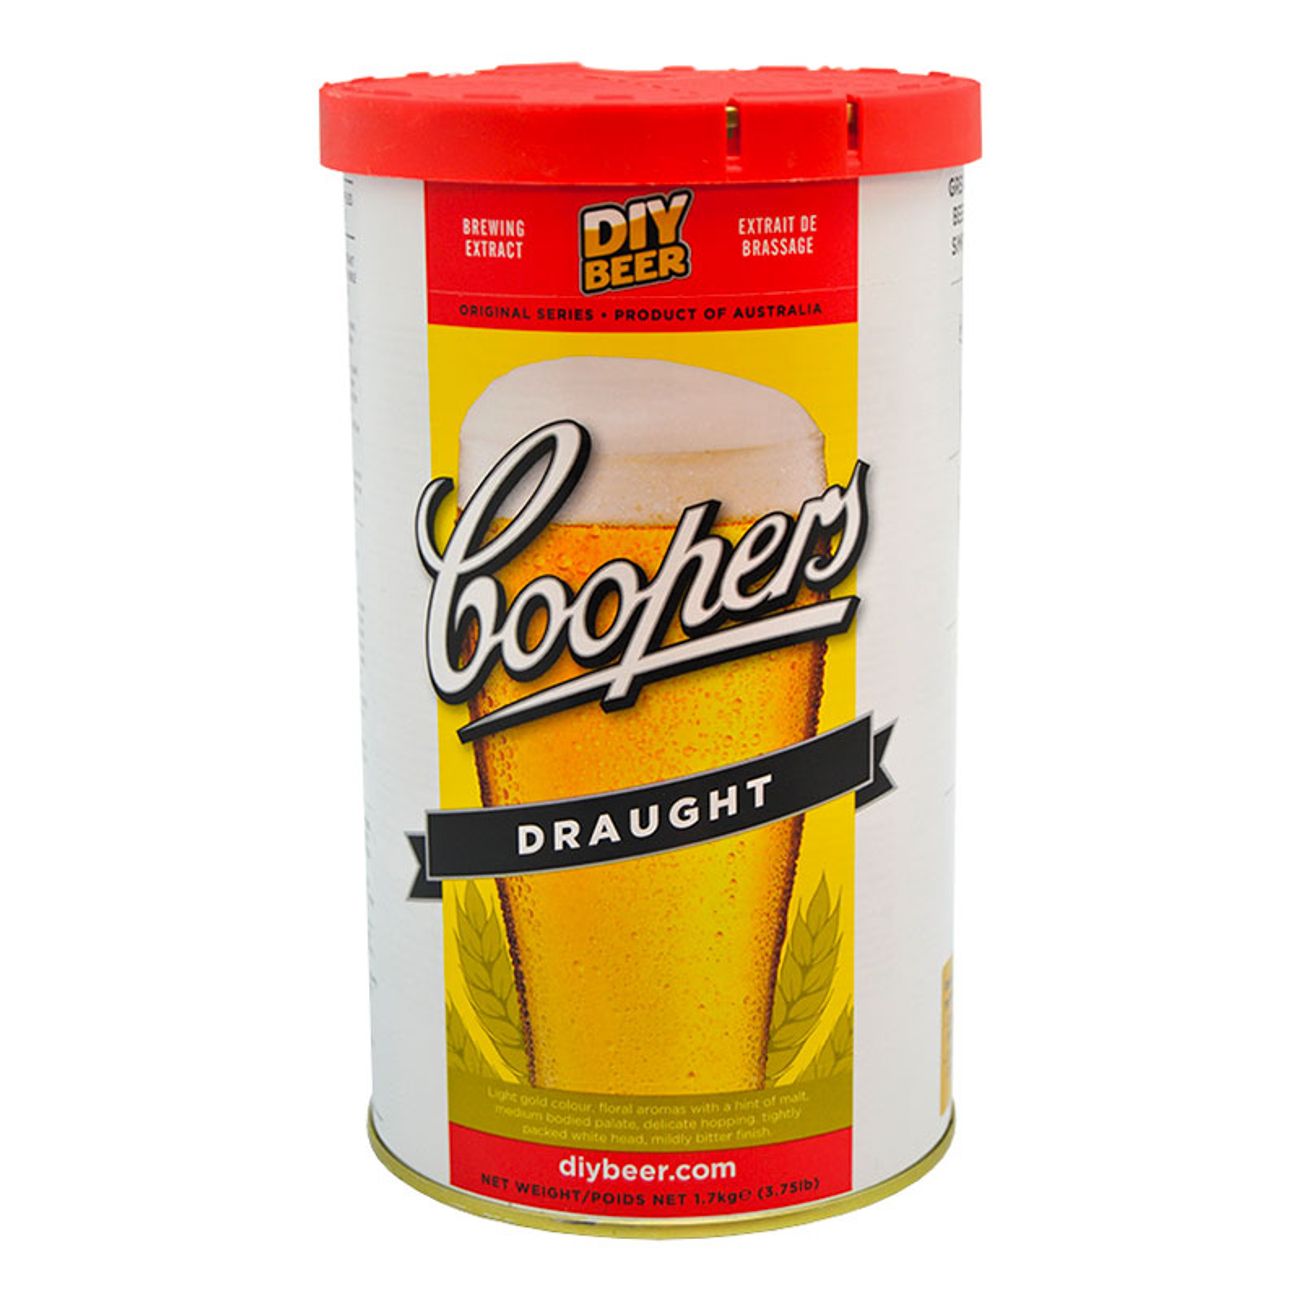 coopers-olsats-draught-73267-1